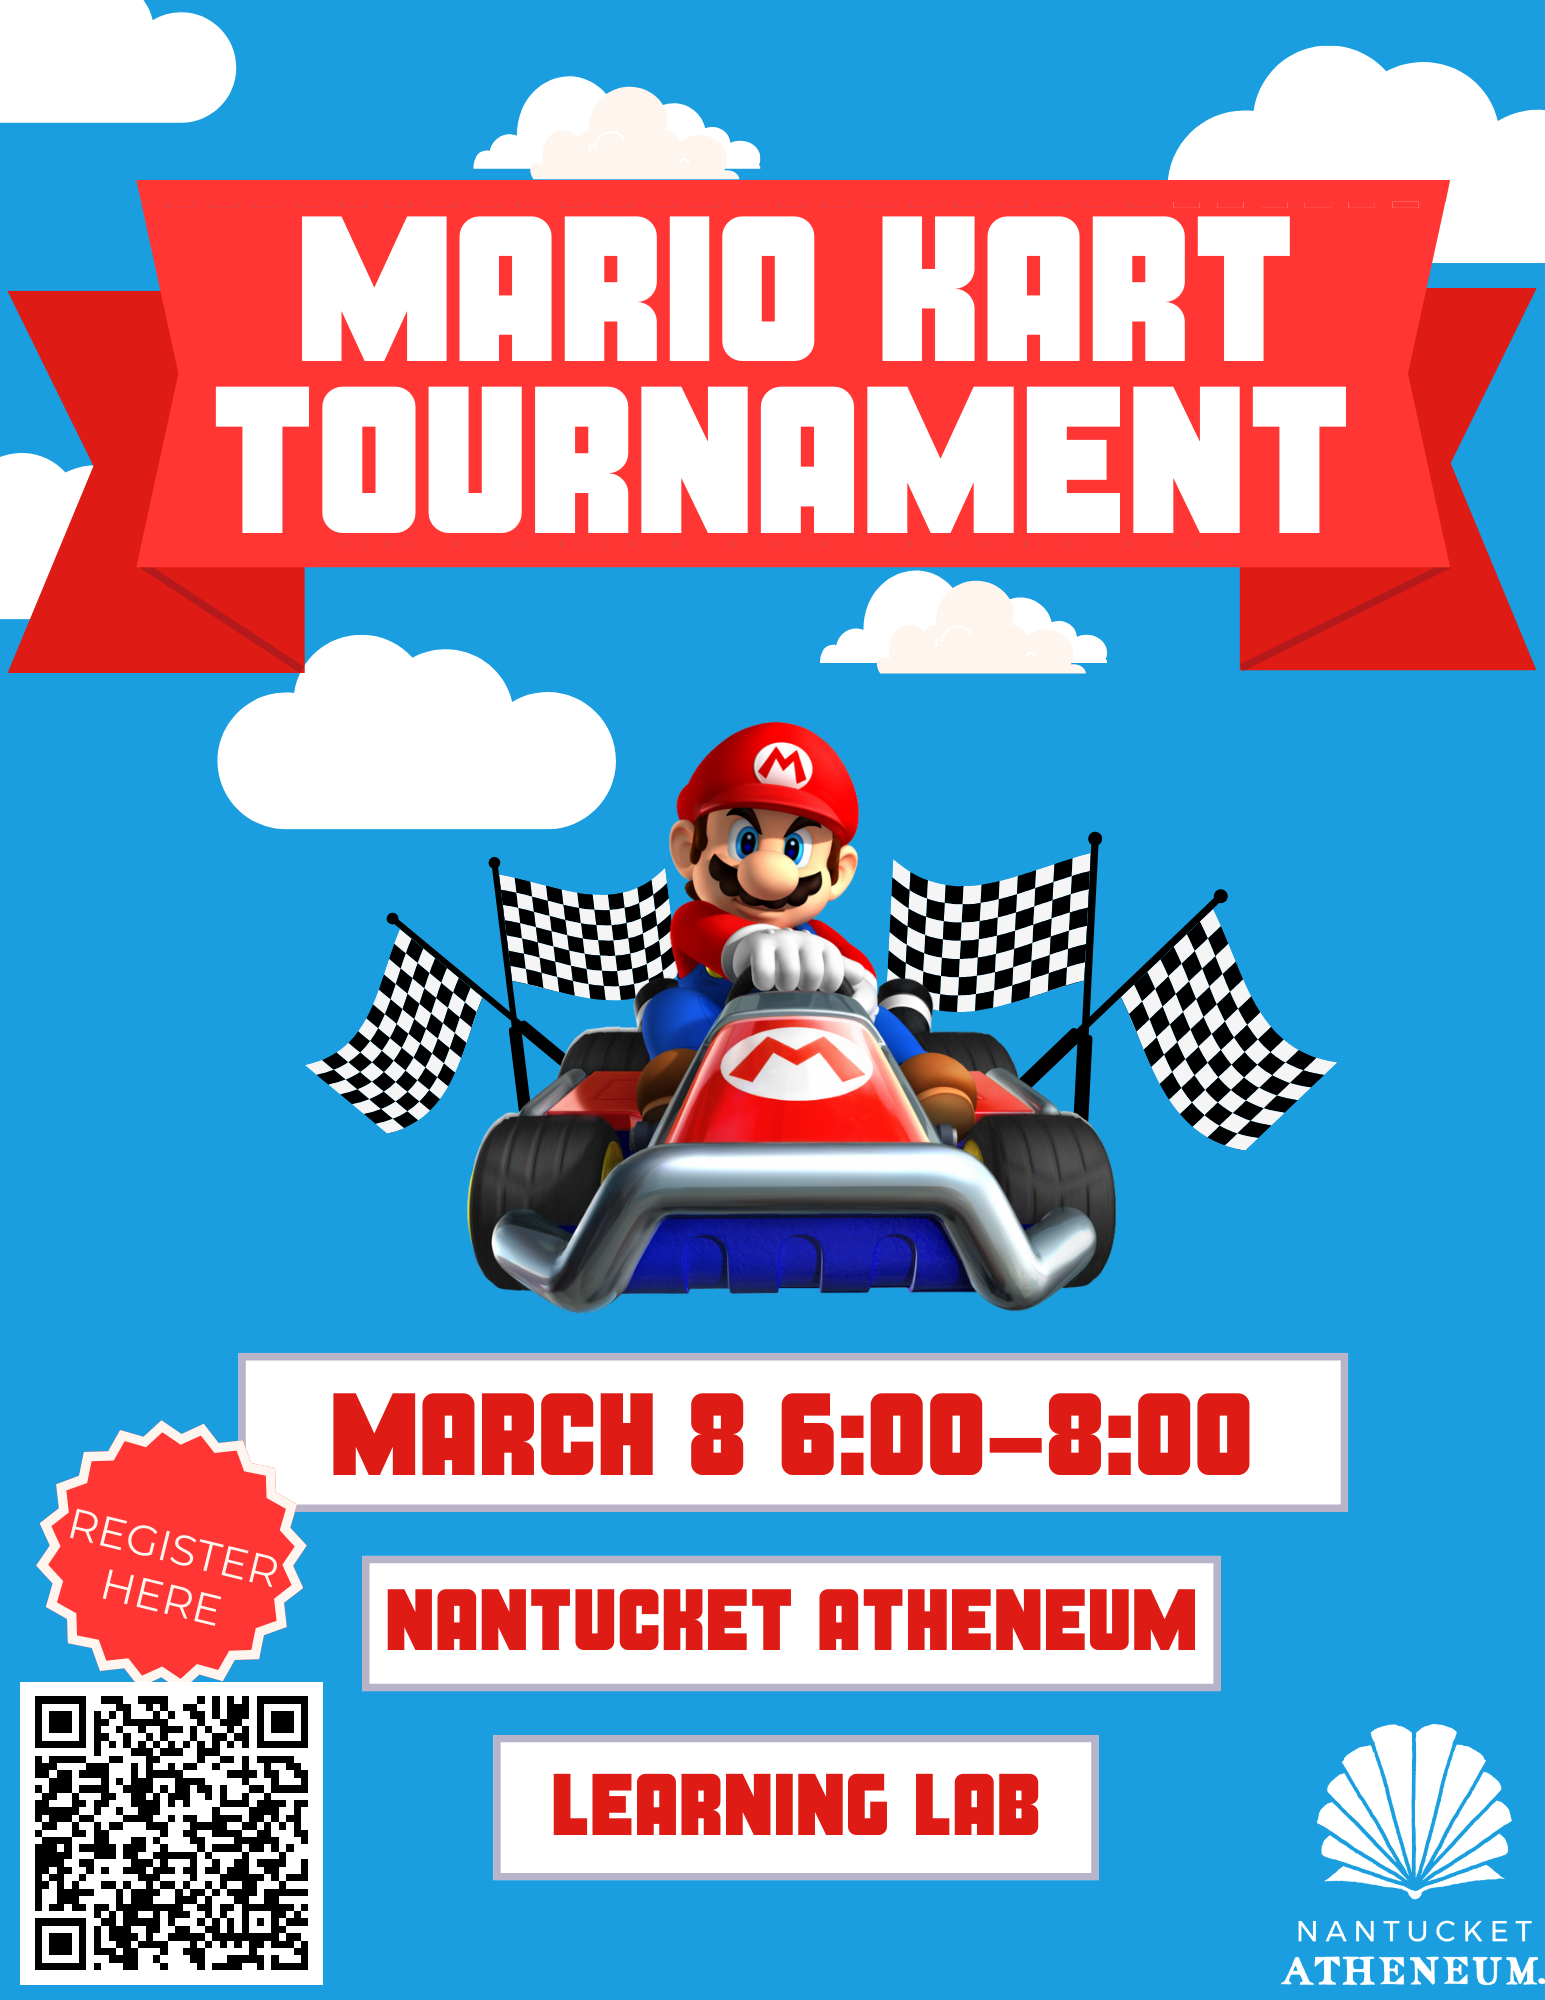 Mario on his racing kart on a blue cloud background